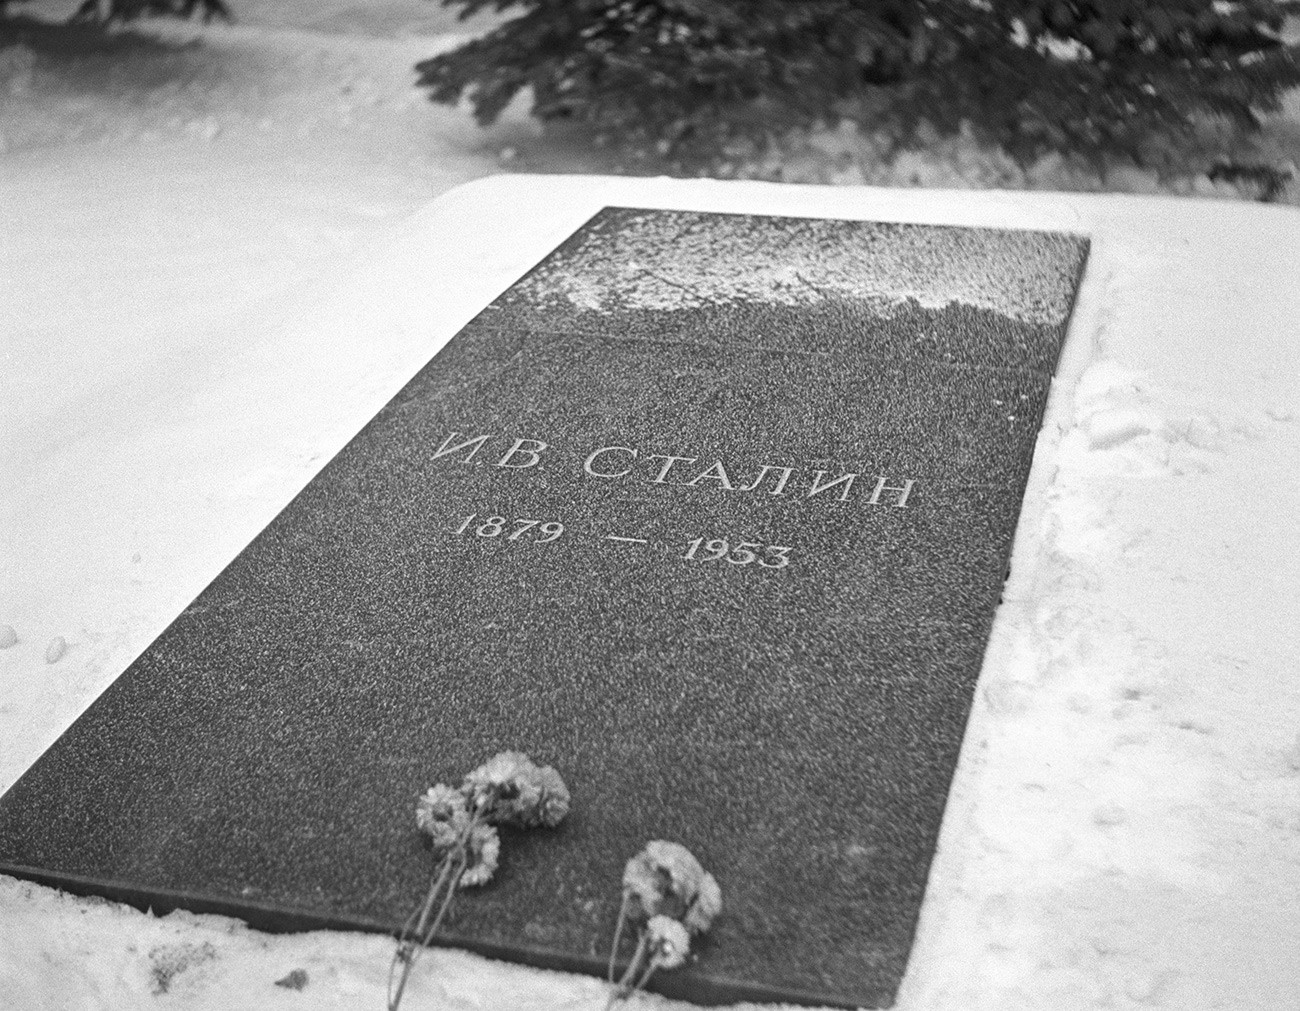 Stalin's tombstone before 1970